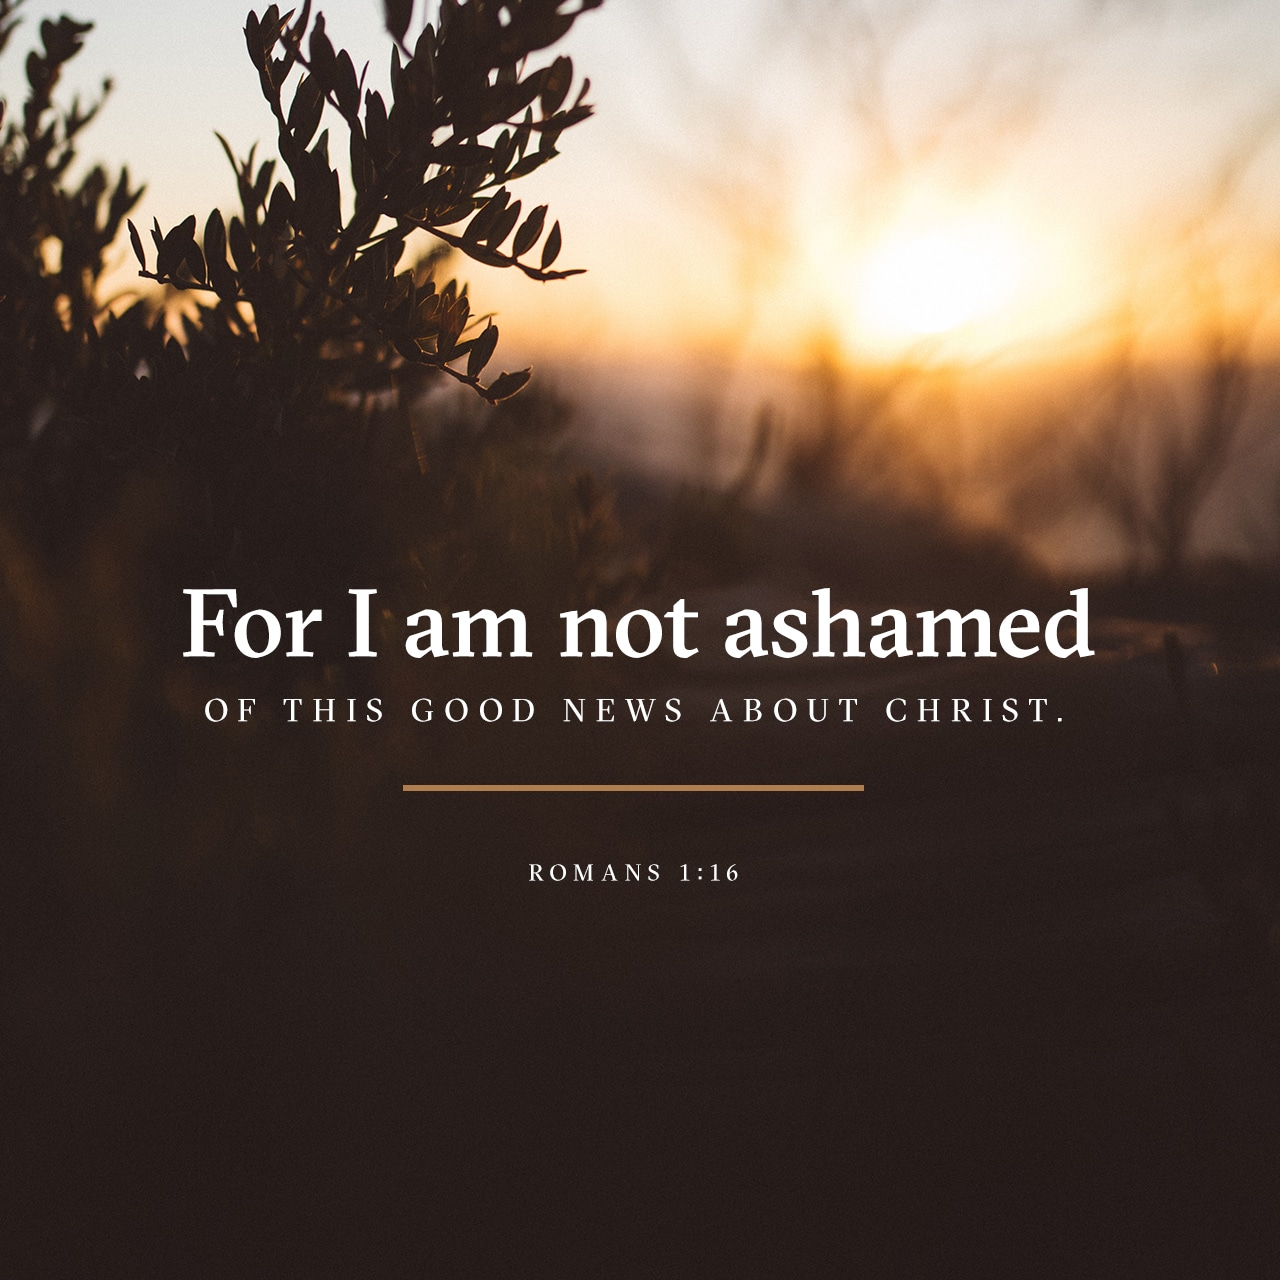 For I am not ashamed to be a Christian